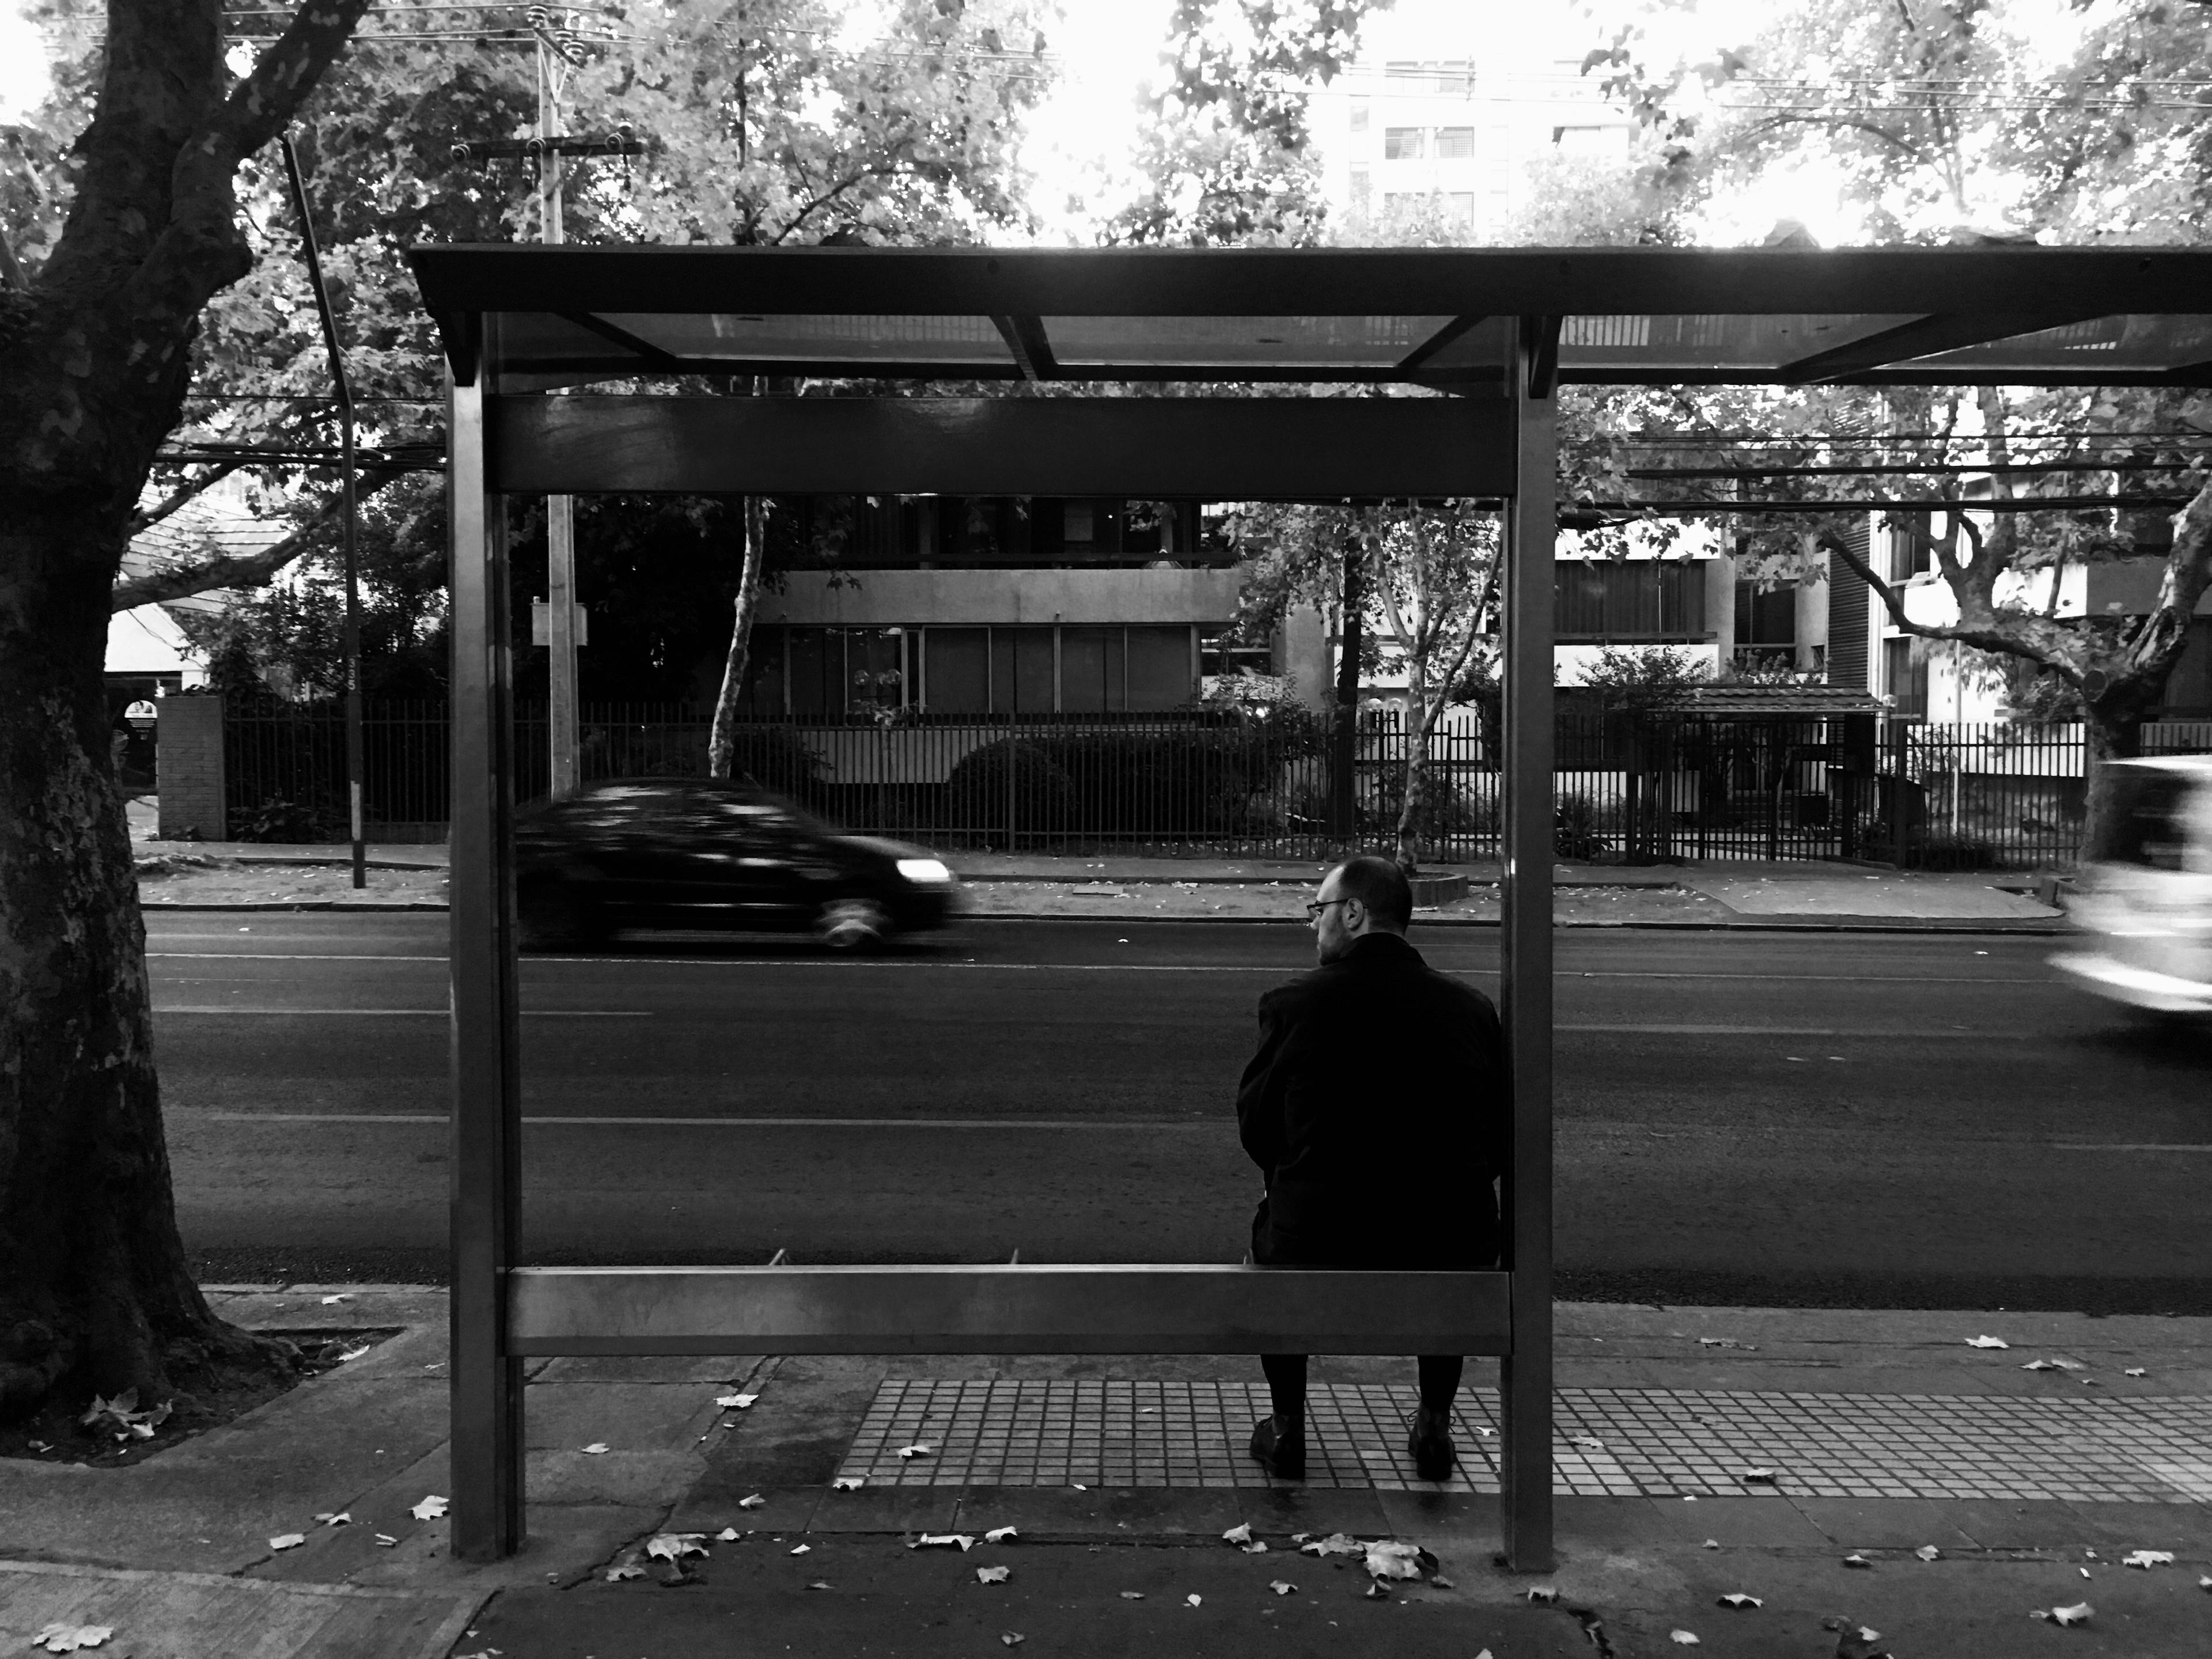 Black and white image of a man waiting alone in a bus stop while cars pass by in the back. The cars are motion-blurred, and the man seems to be looking at the photographer suspicously.